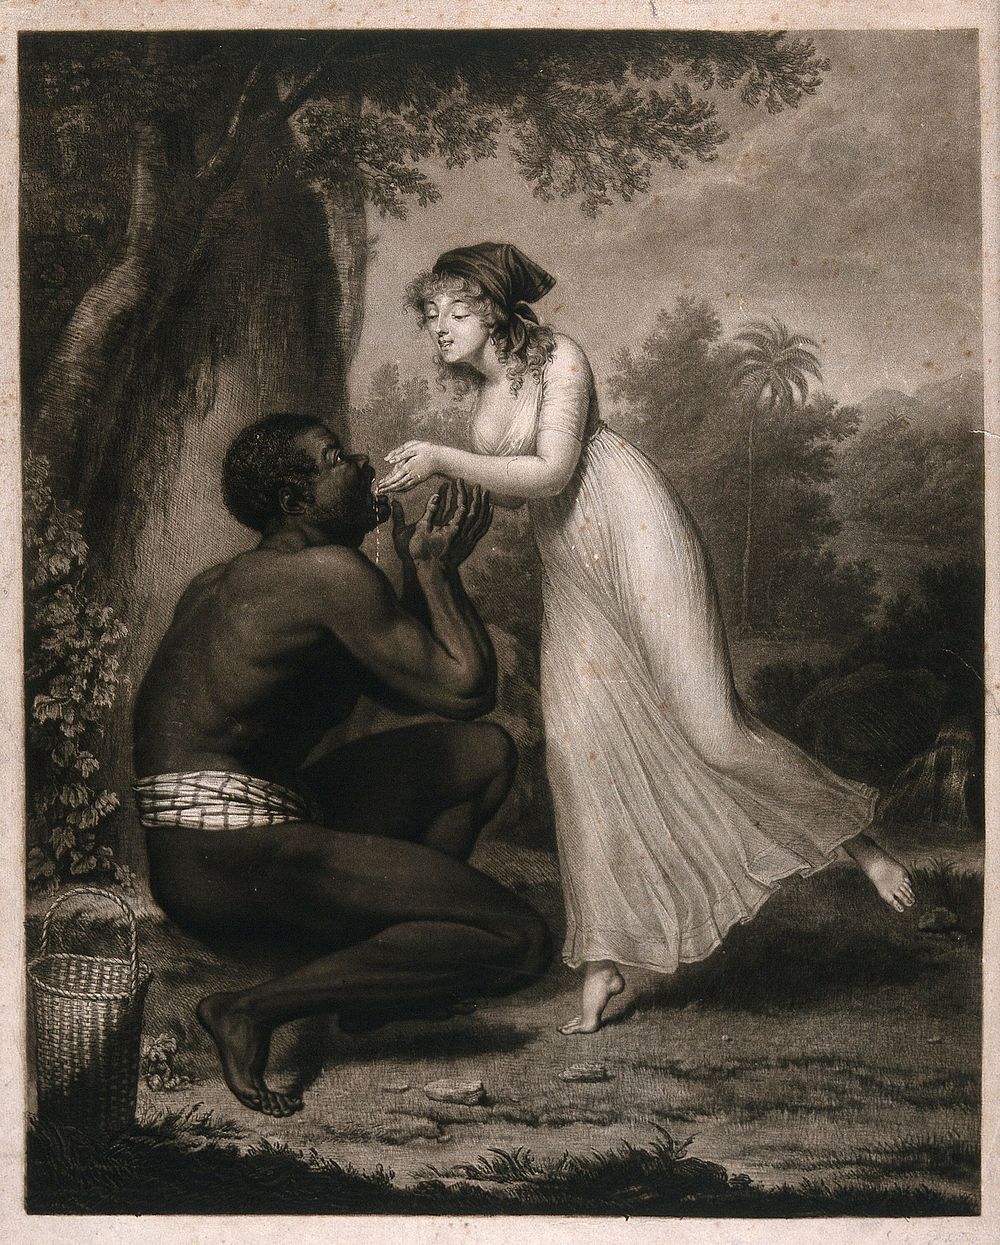 Louise Chevalier in the role of Virginie is feeding water from her hands into the mouth of a black man in a loin-cloth.…